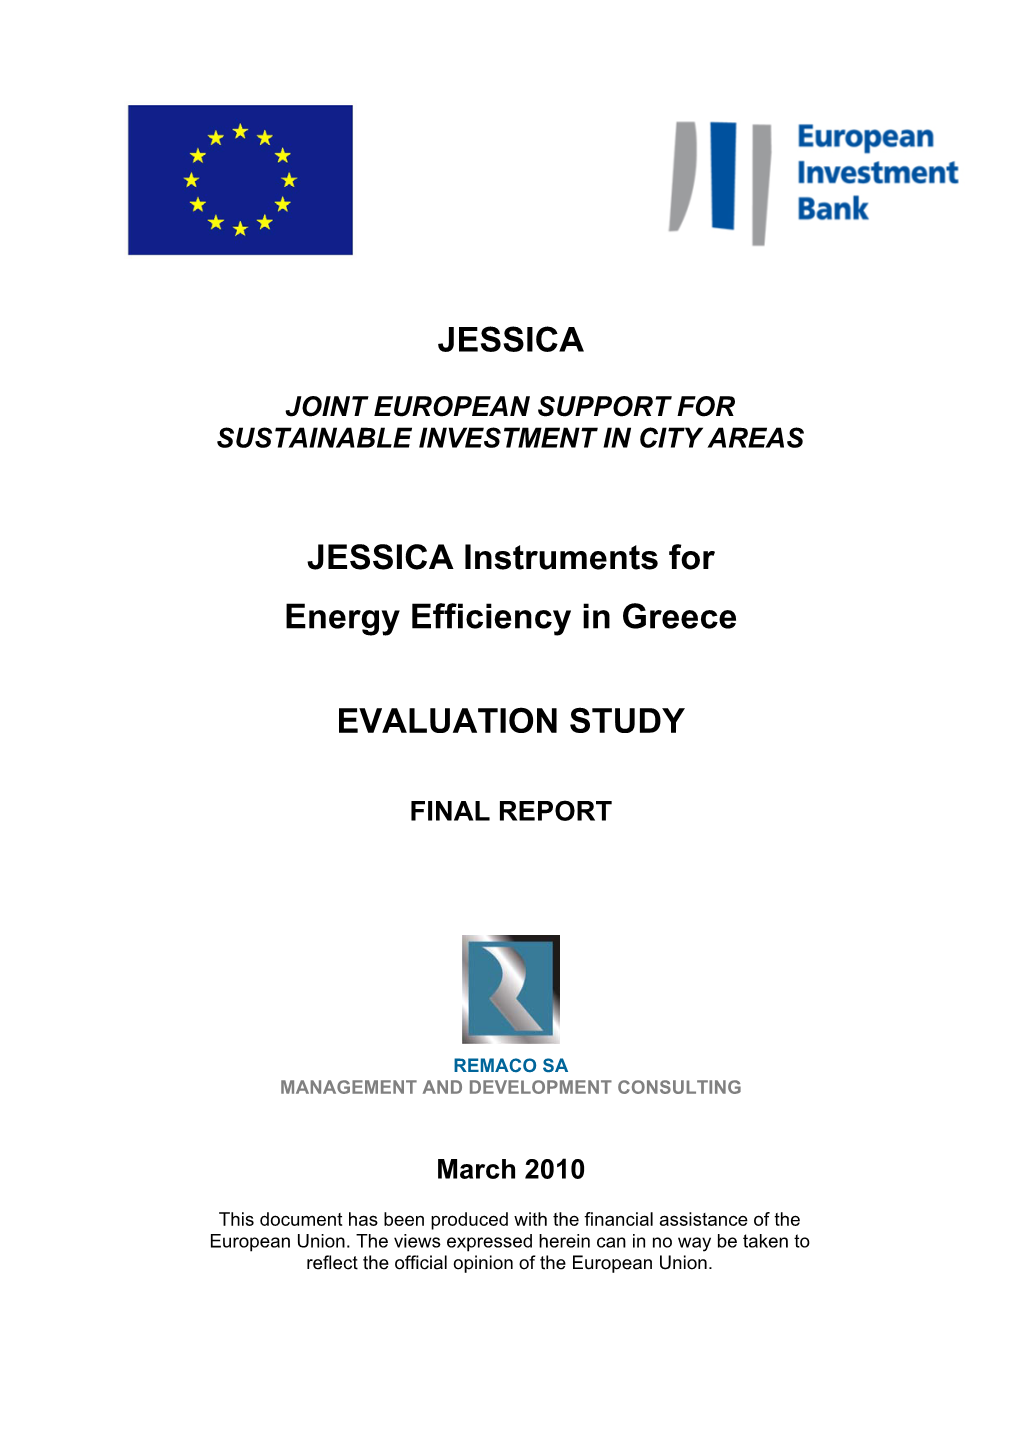 JESSICA Instruments for Energy Efficiency in Greece